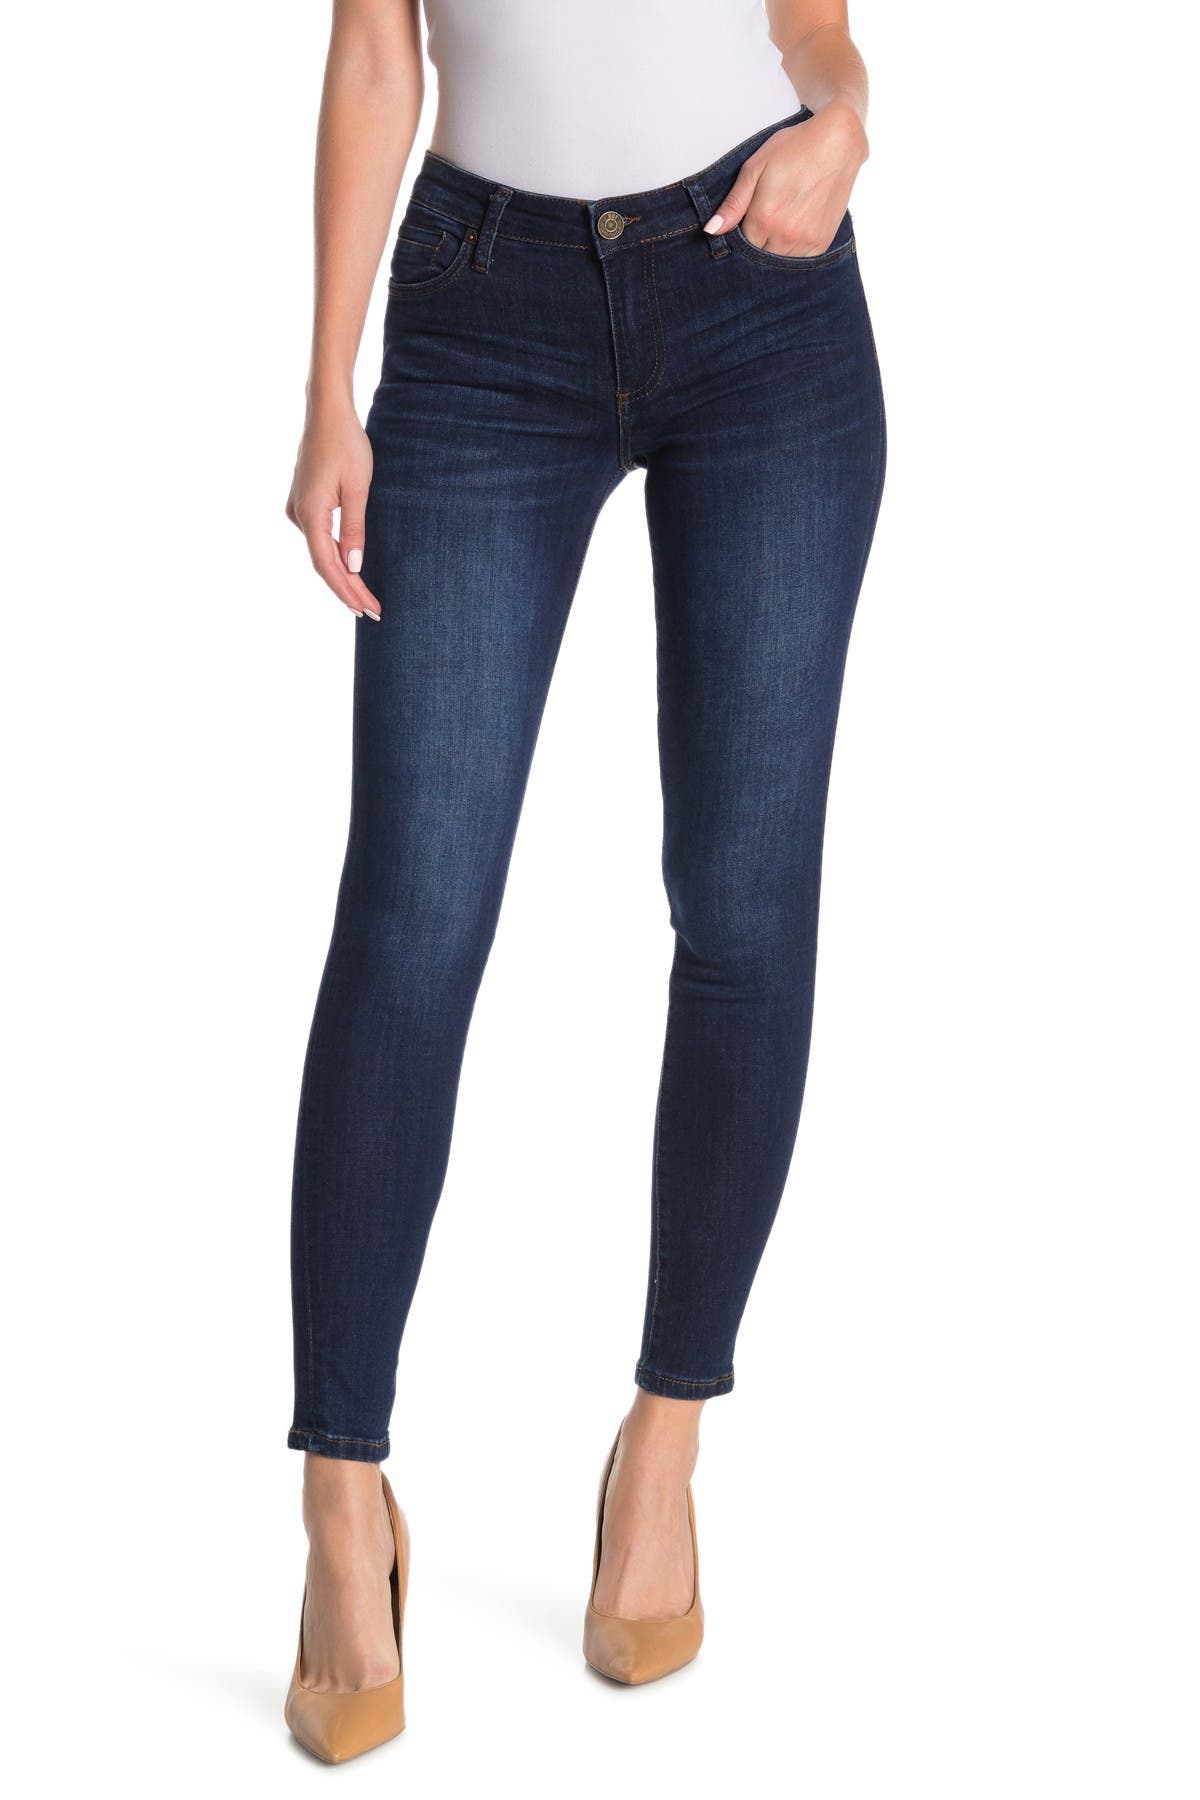 classic mid rise skinny jeans